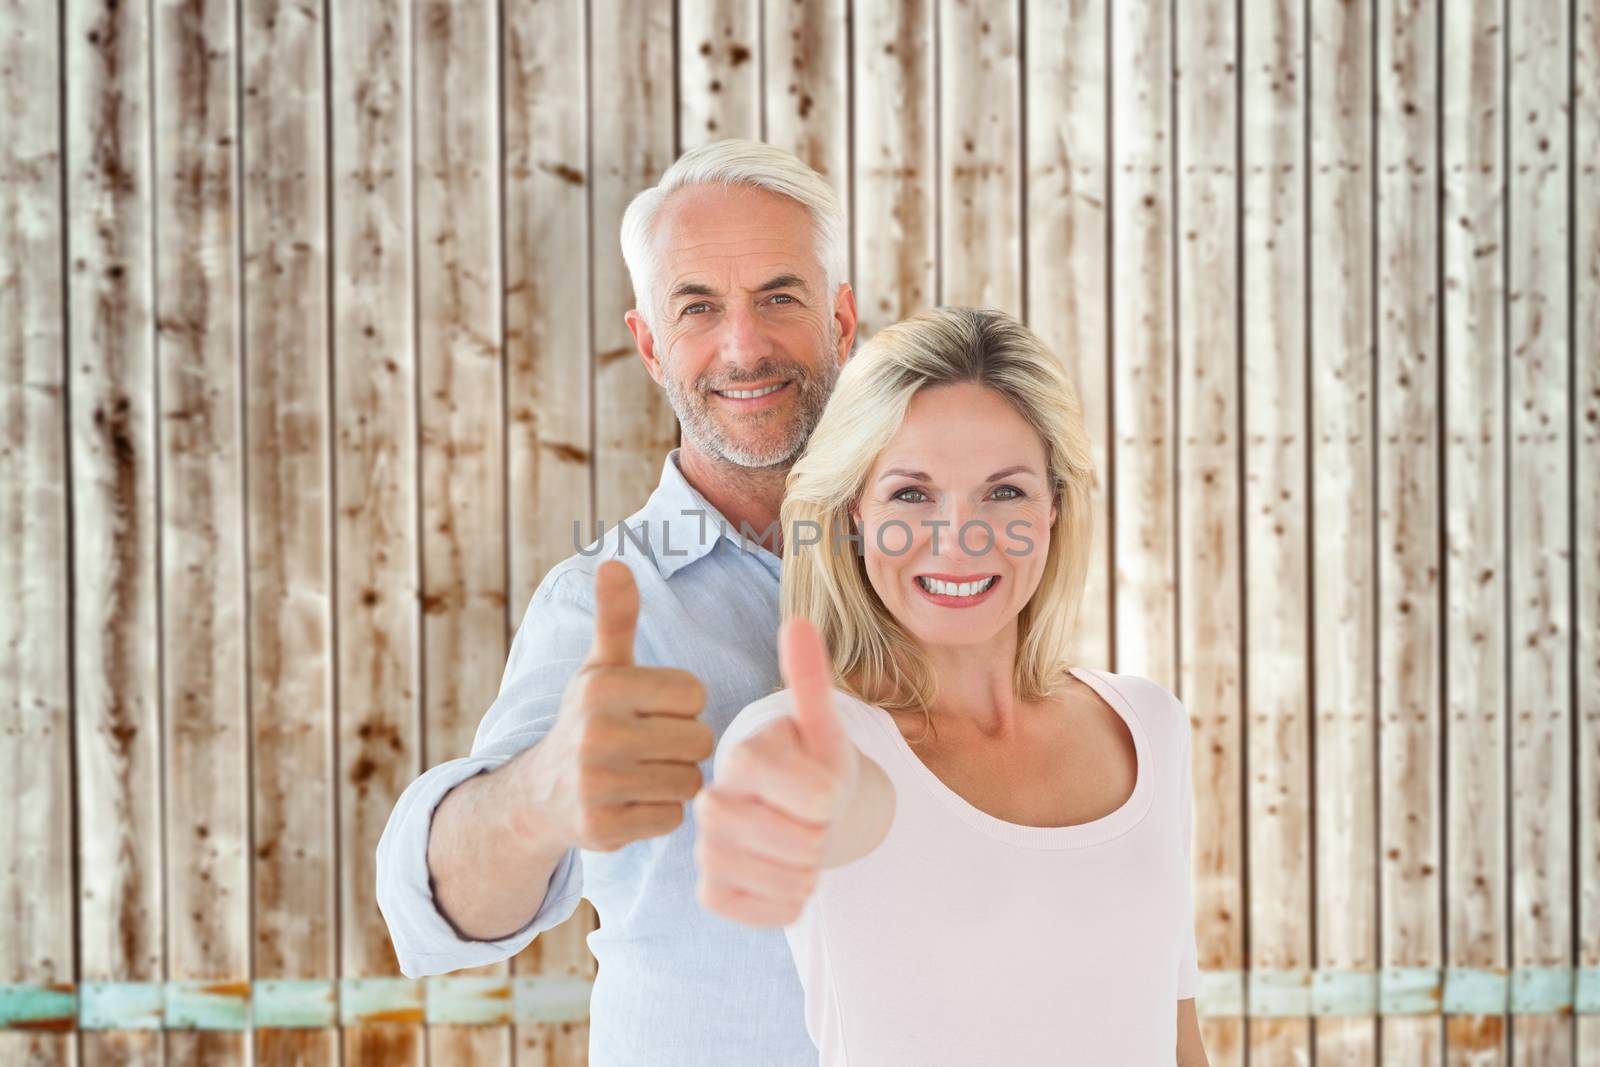 Smiling couple showing thumbs up together against faded pine wooden planks